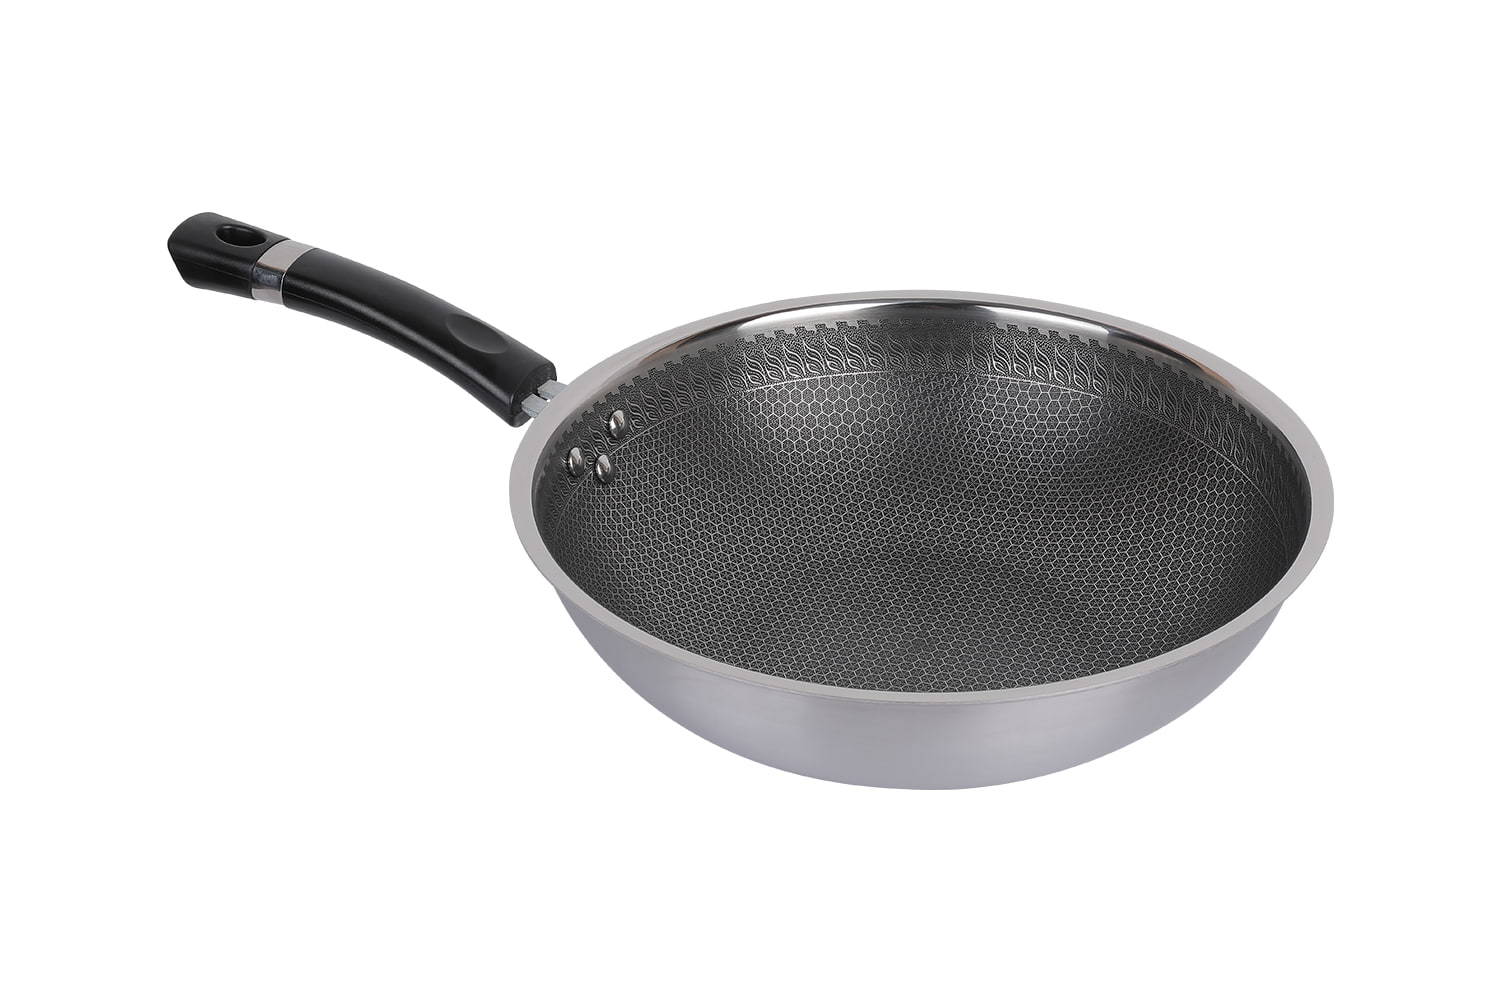 CF30C-CJ538 Stainless Steel Wok with Glass Lid, Etching Non-Stick Coating, Scratch-resistant, household